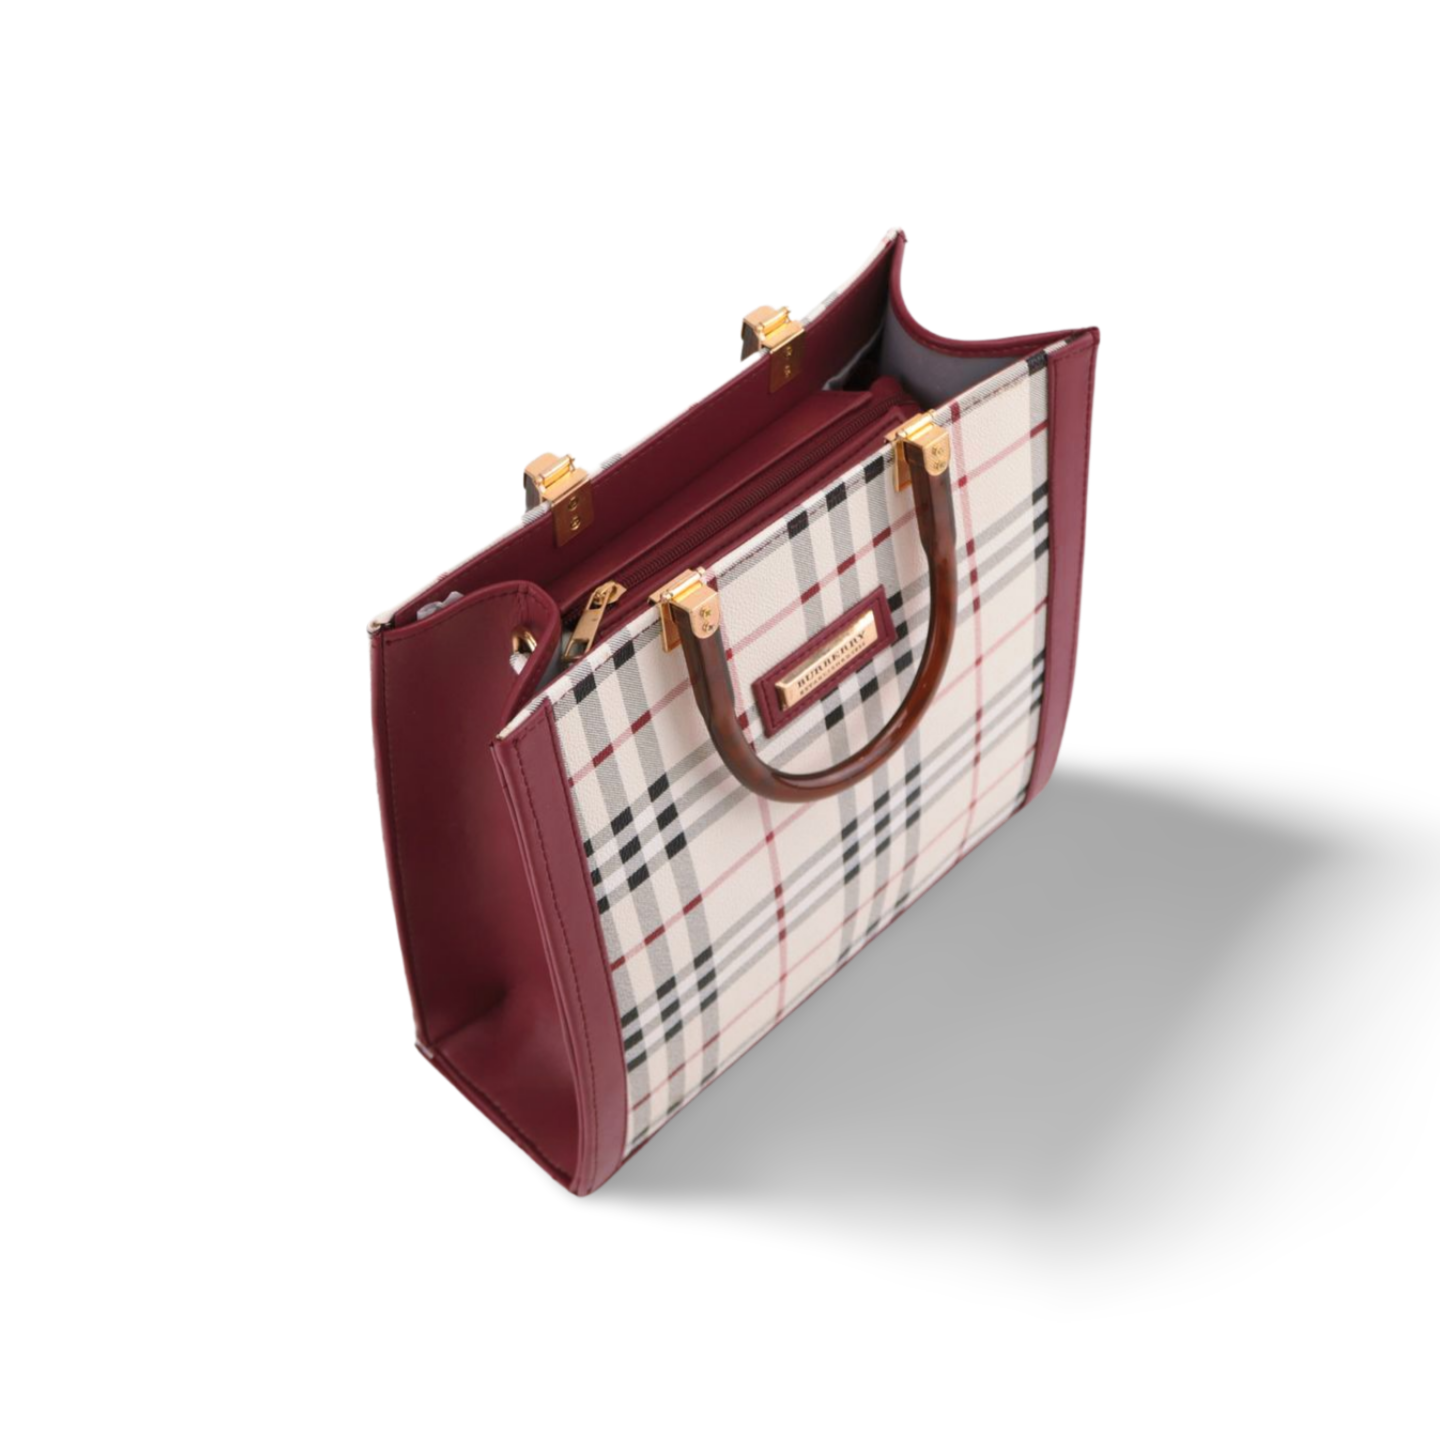 Classic Checked Tote Bag with Detachable Strap